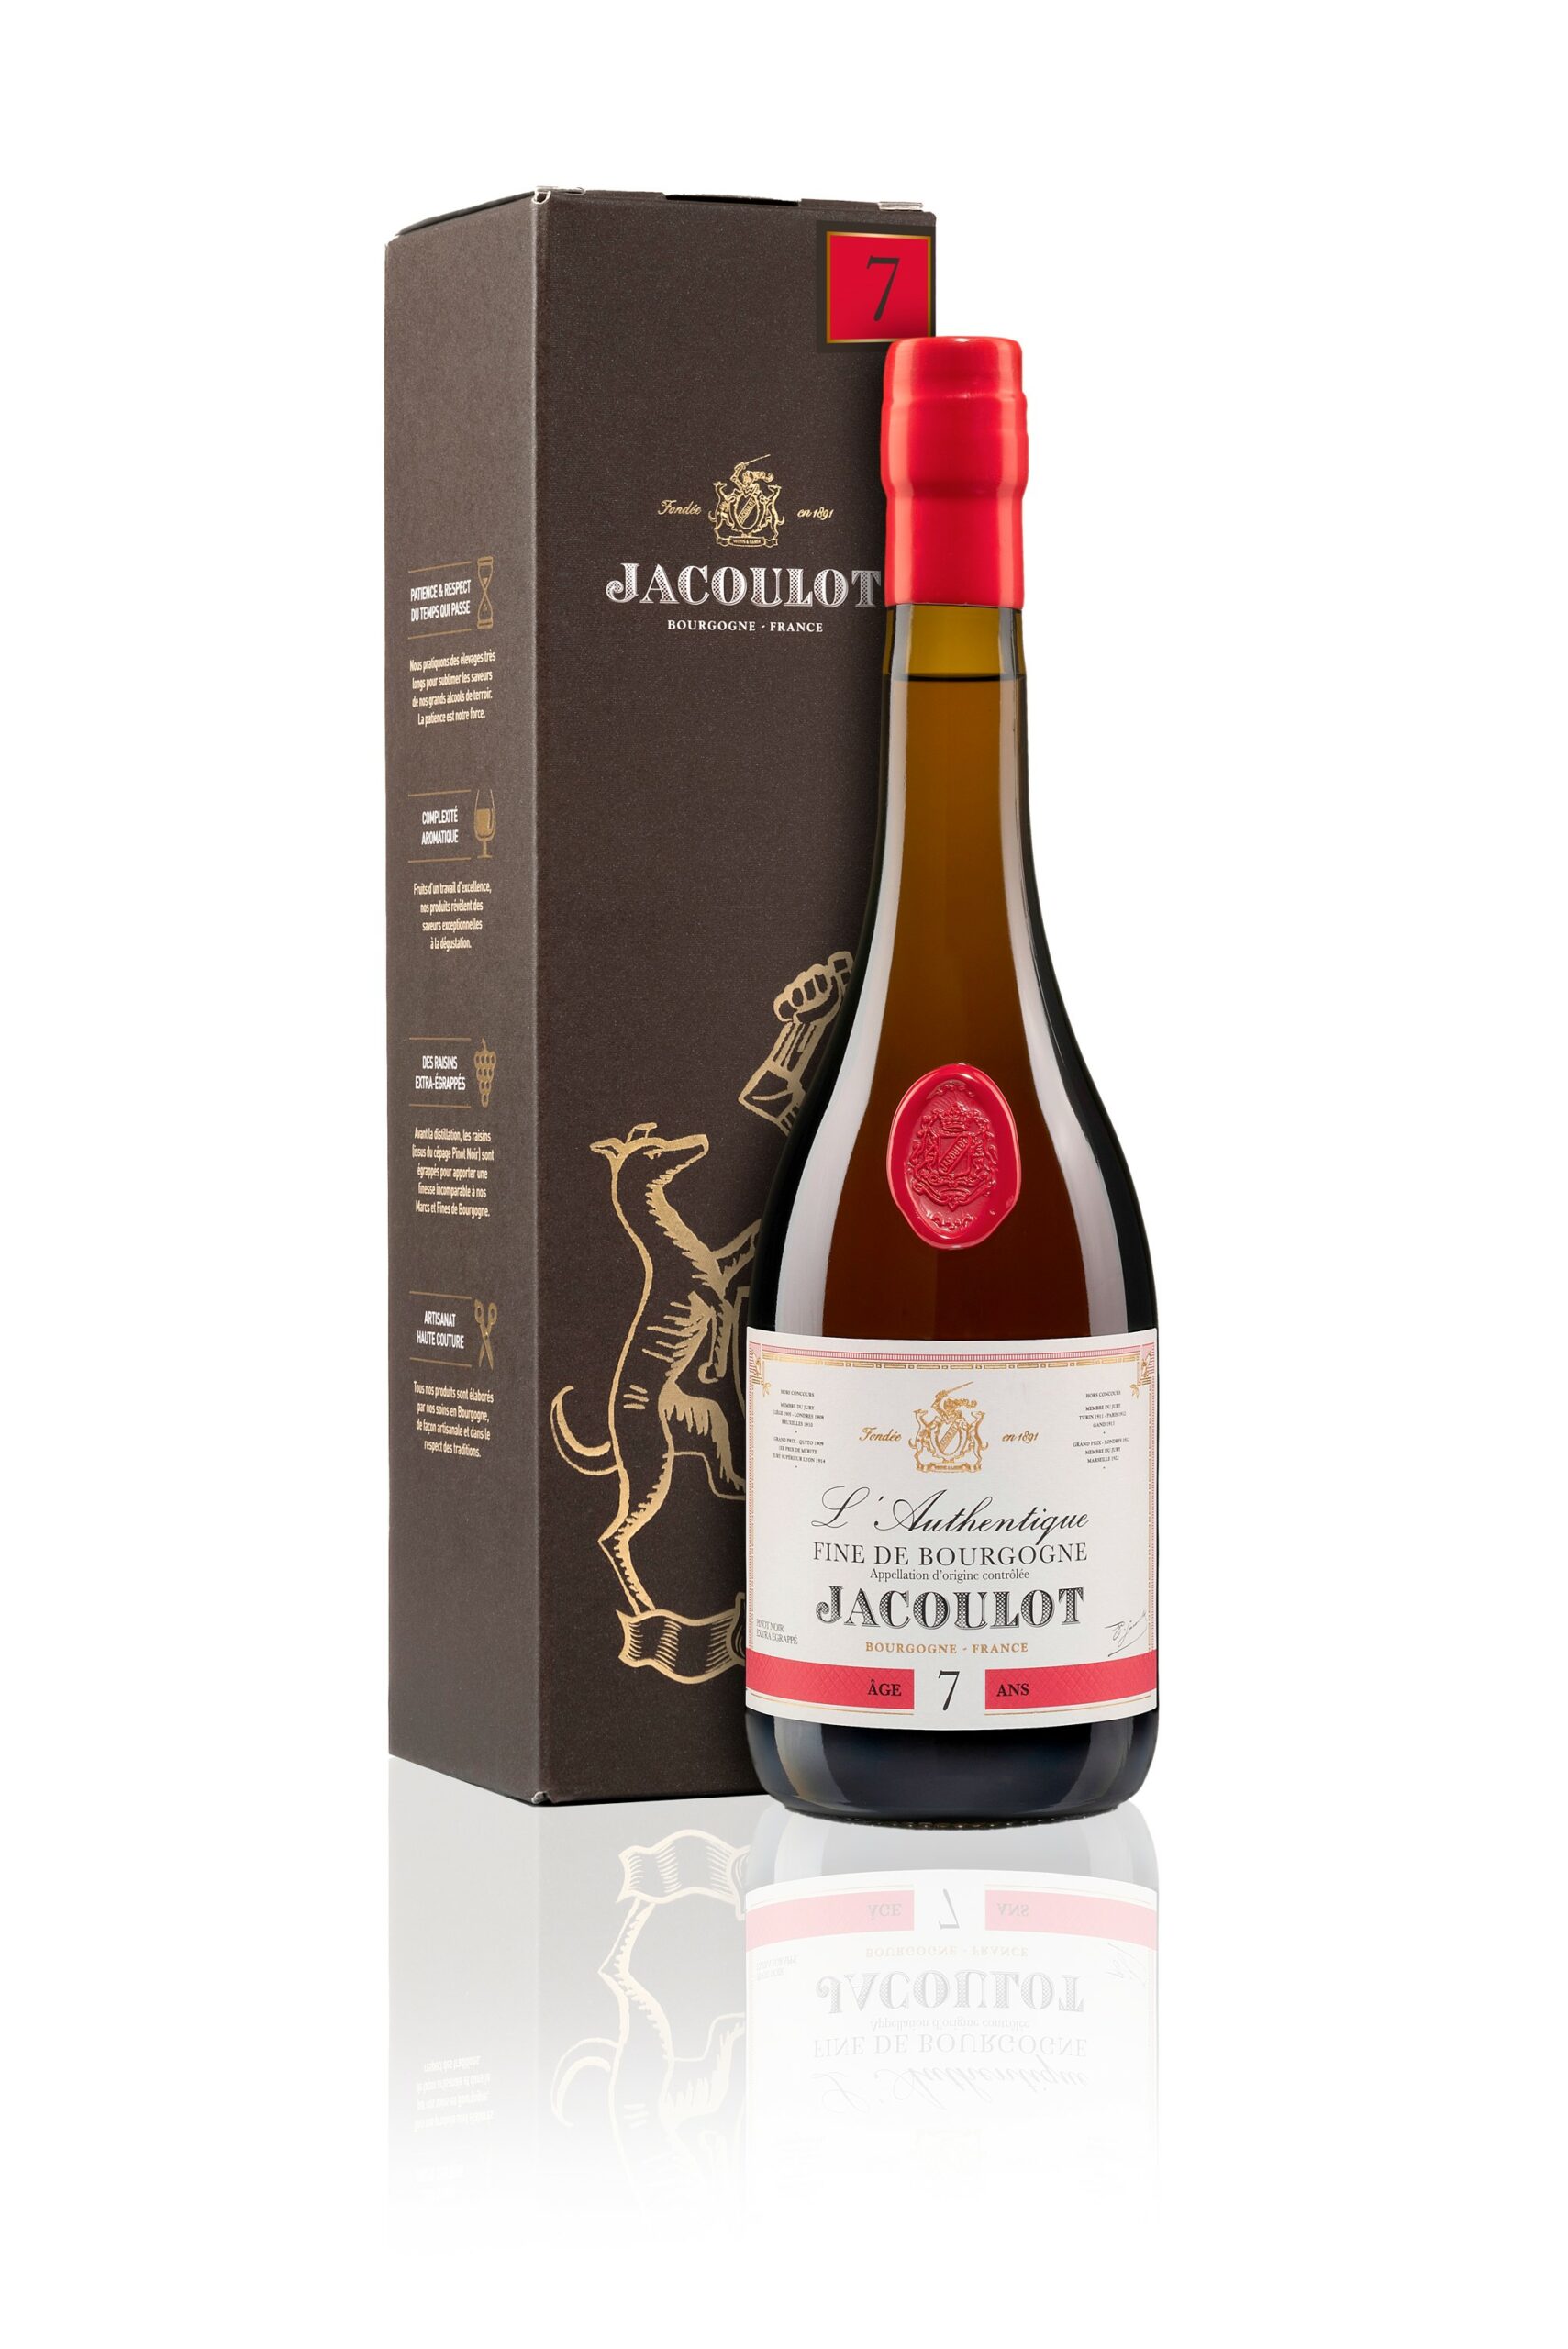 Jacoulot-fine-bourgogne-7ans-70cl-bouchee-ciree-etui